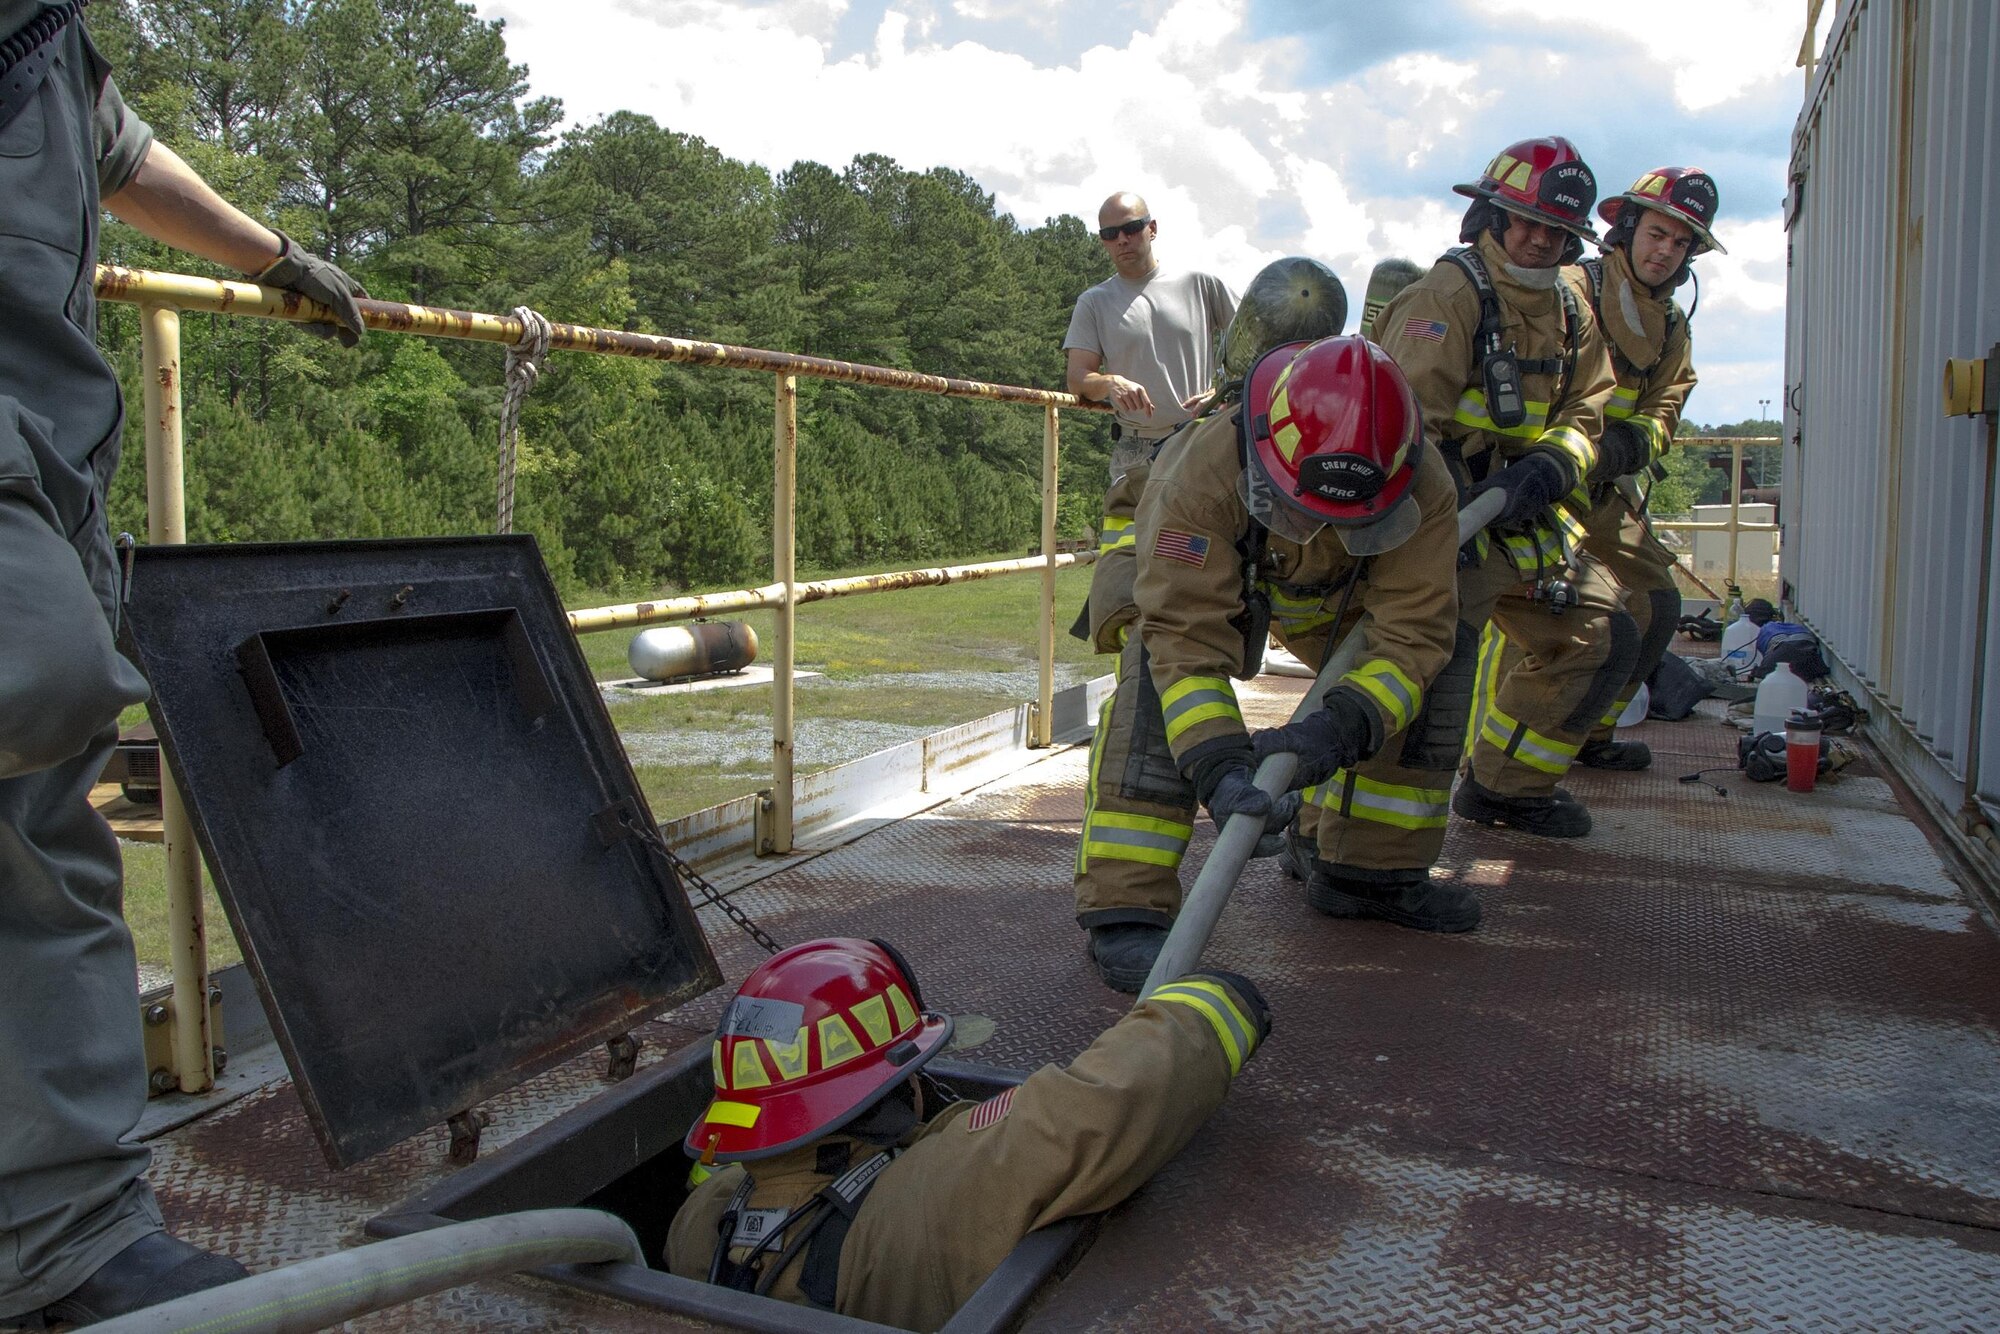 A team of Air Force Reserve firefighters practice using the hoseline to rescue a firefighter from a simulated collapsed building during the first-ever Air Force Reserve Command Firefighter Rescue and Survival Course at Dobbins Air Reserve Base, Ga., April 18, 2017. Twenty Citizen Airmen participated in the intense 50-hour course held at the 622nd Civil Engineer Group expeditionary combat support-training certification center, which focused on a Rapid Intervention Crew, or RIC. The RIC is a dedicated and specially trained group of firefighters whose responsibilities include safely evacuating a distressed firefighter from a structure. (U.S. Air Force photo by Master Sgt. Theanne K. Herrmann)